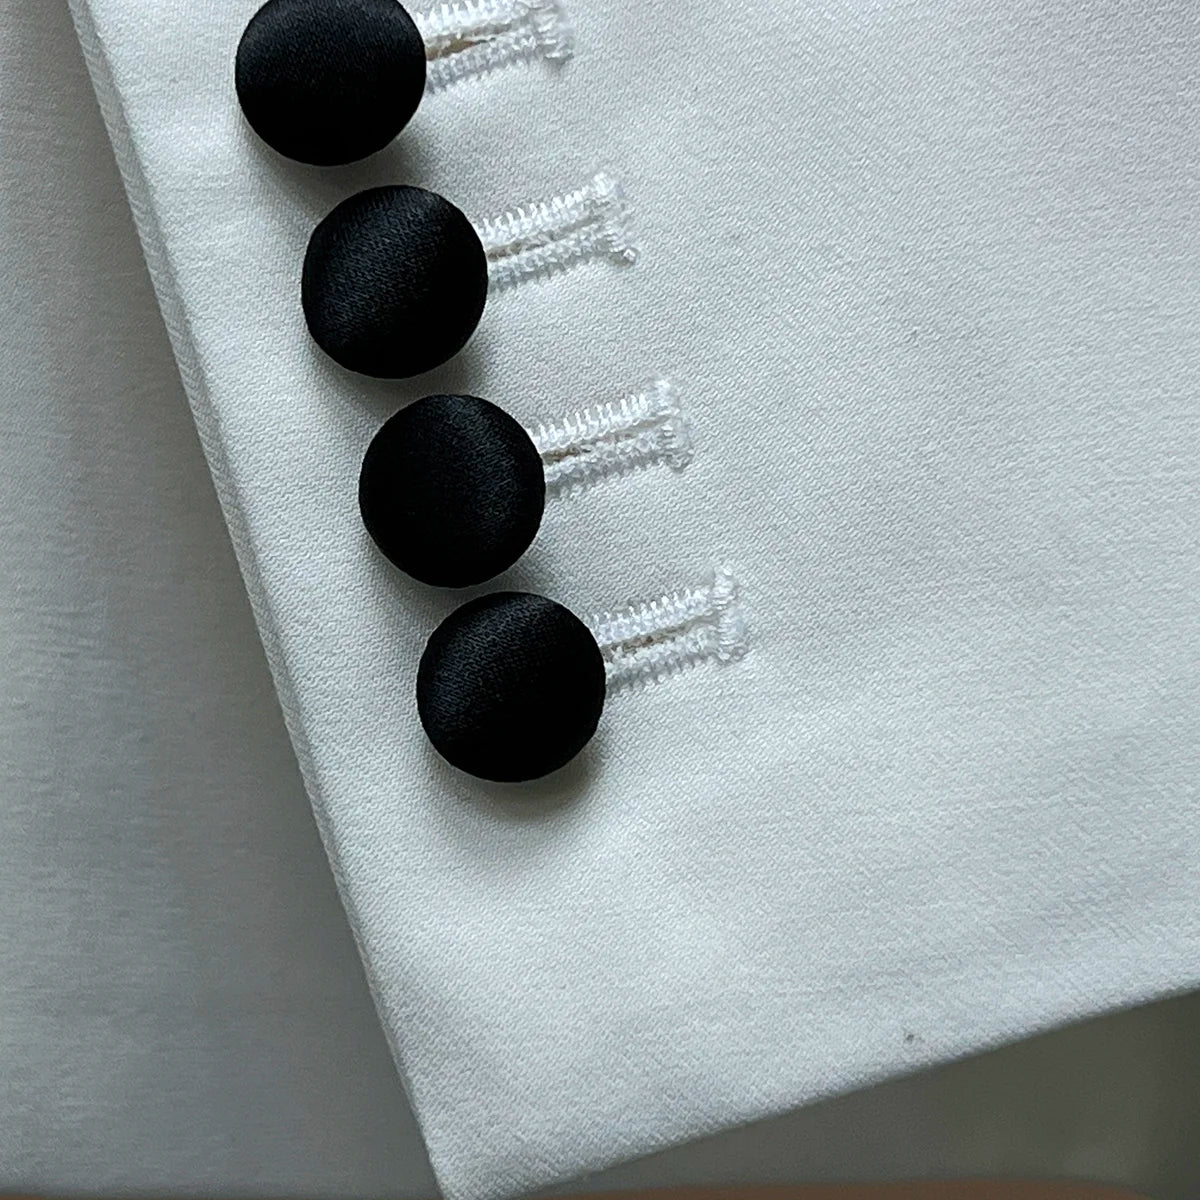 Close-up of the functional sleeve buttonholes on the ivory tuxedo jacket, featuring black satin covered buttons.